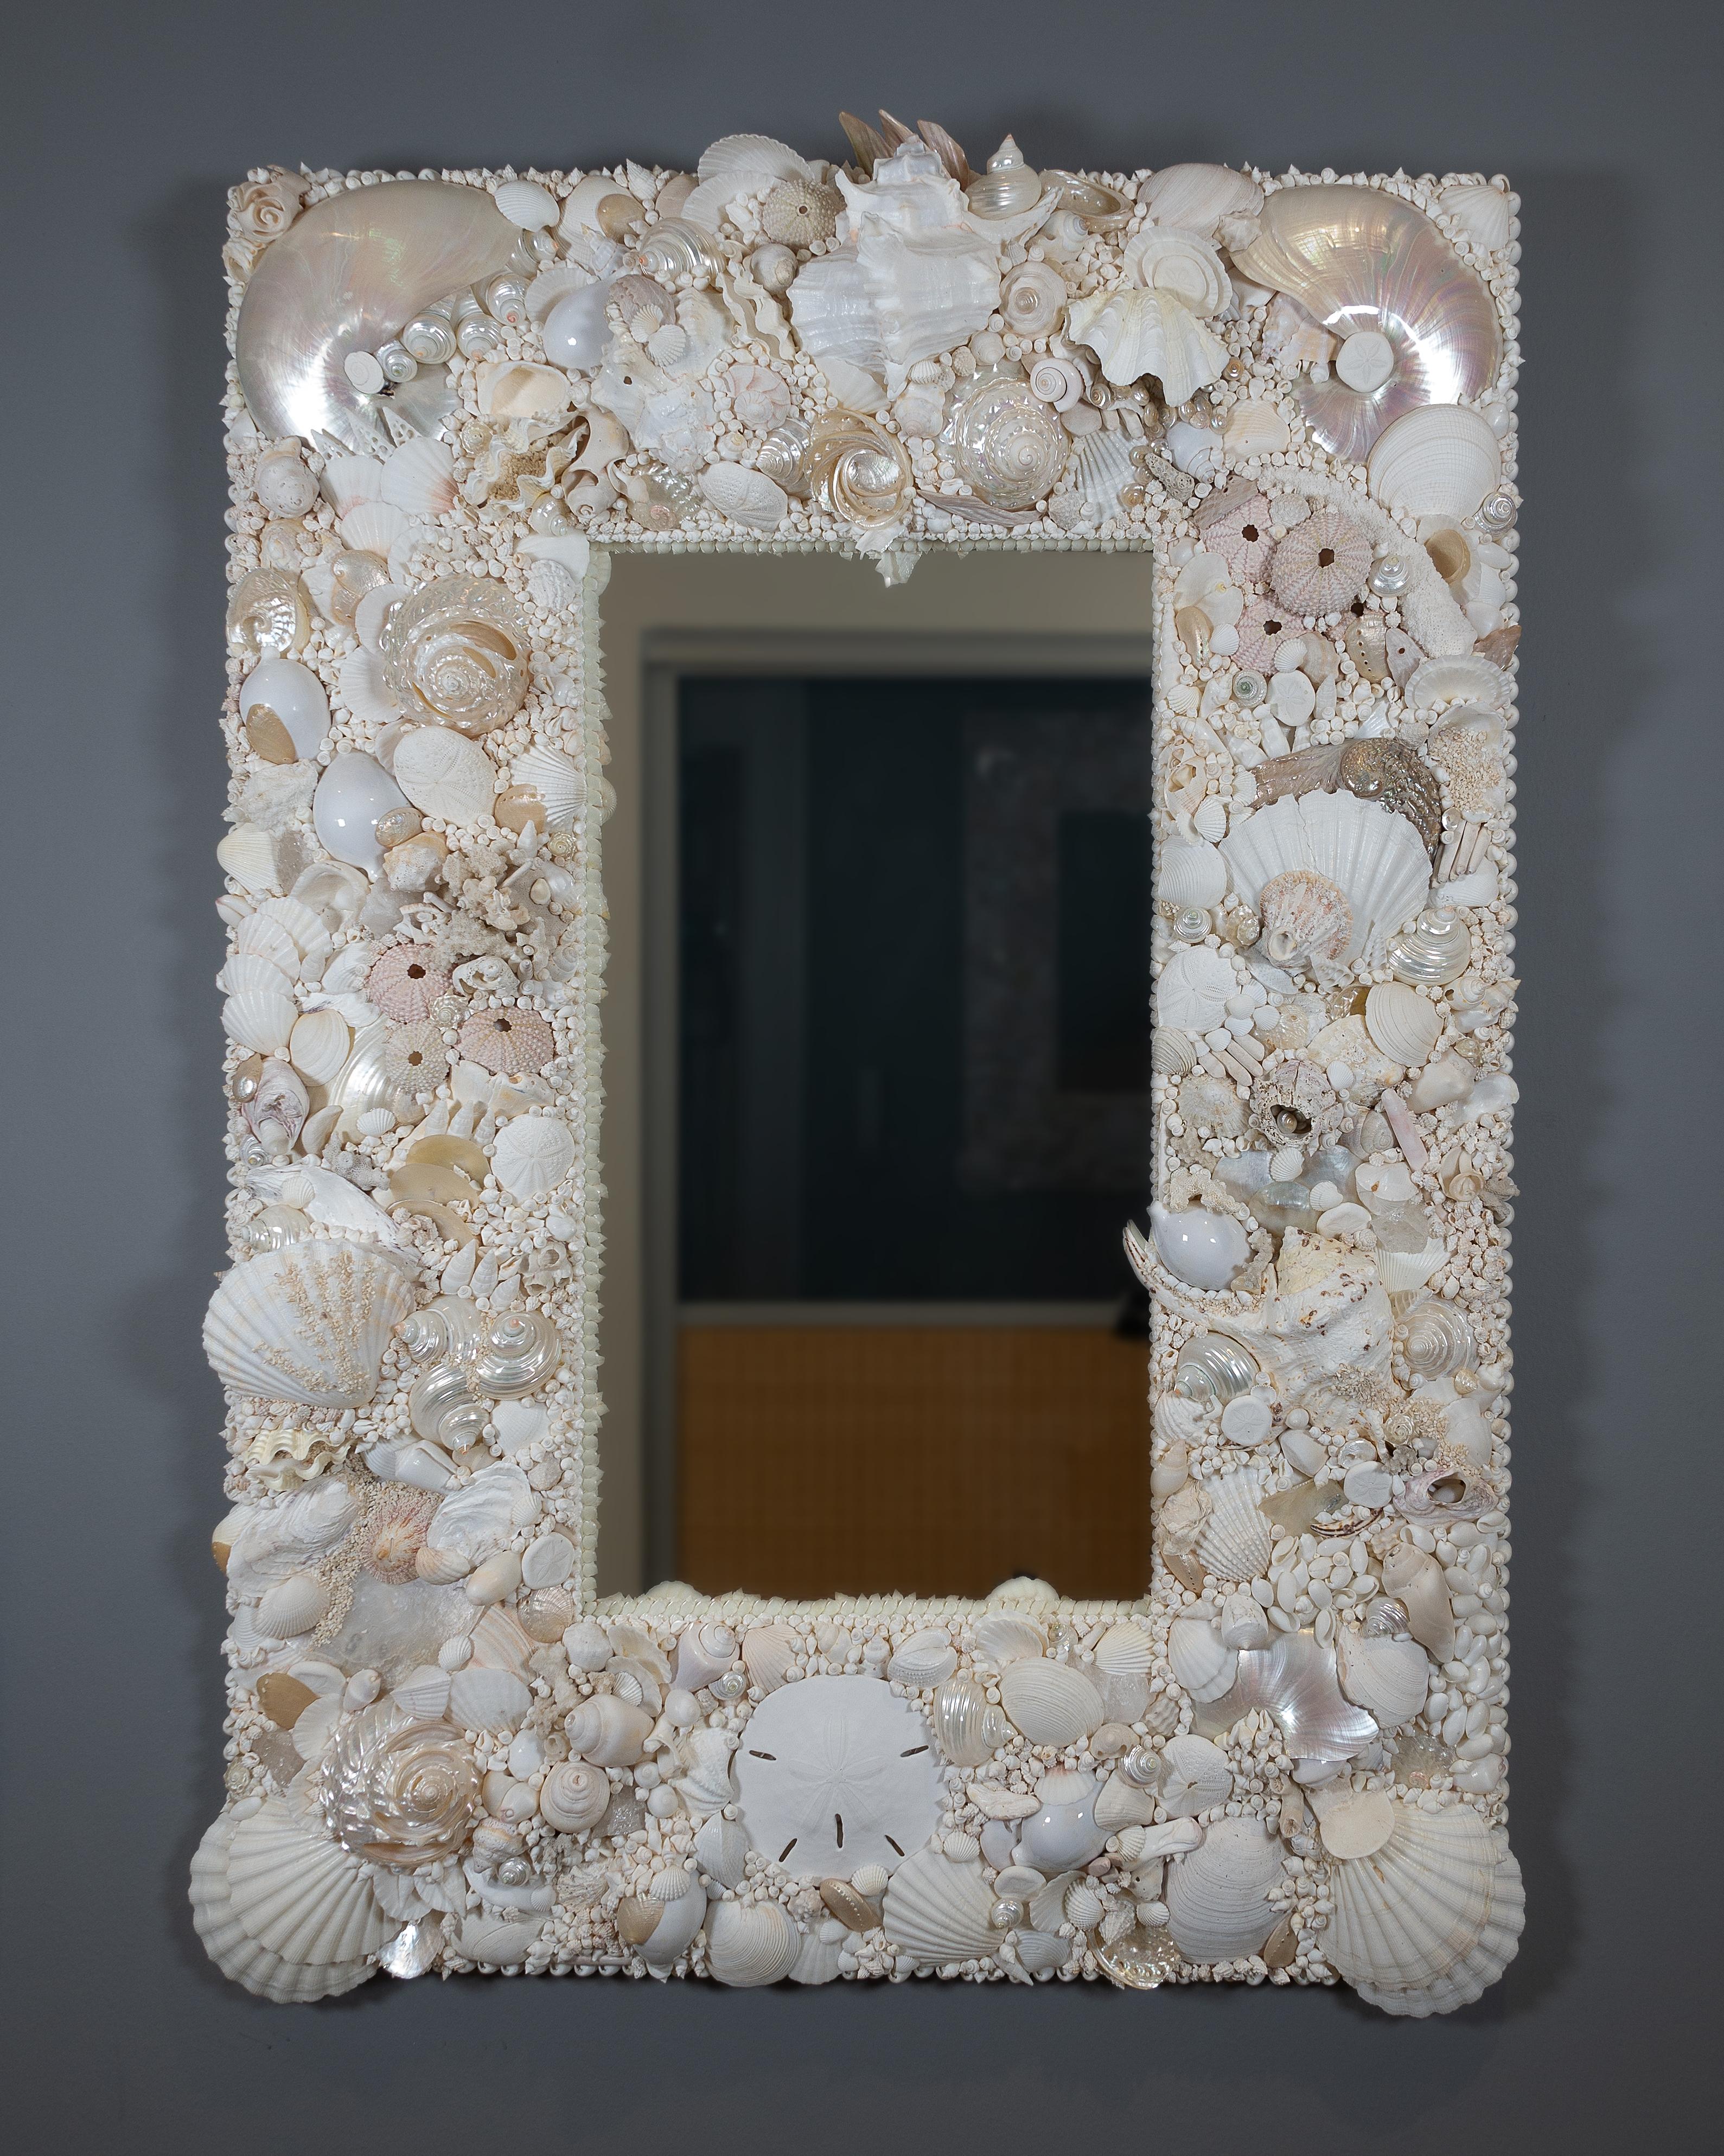 White Ocean – unique Shell Mirror by Shellman Scandinavia in Sweden.

An all-white shell mirror created in the Shellman organic free-form tradition. The frame is strikingly decorated with thousands of white and polished shells from near and far.